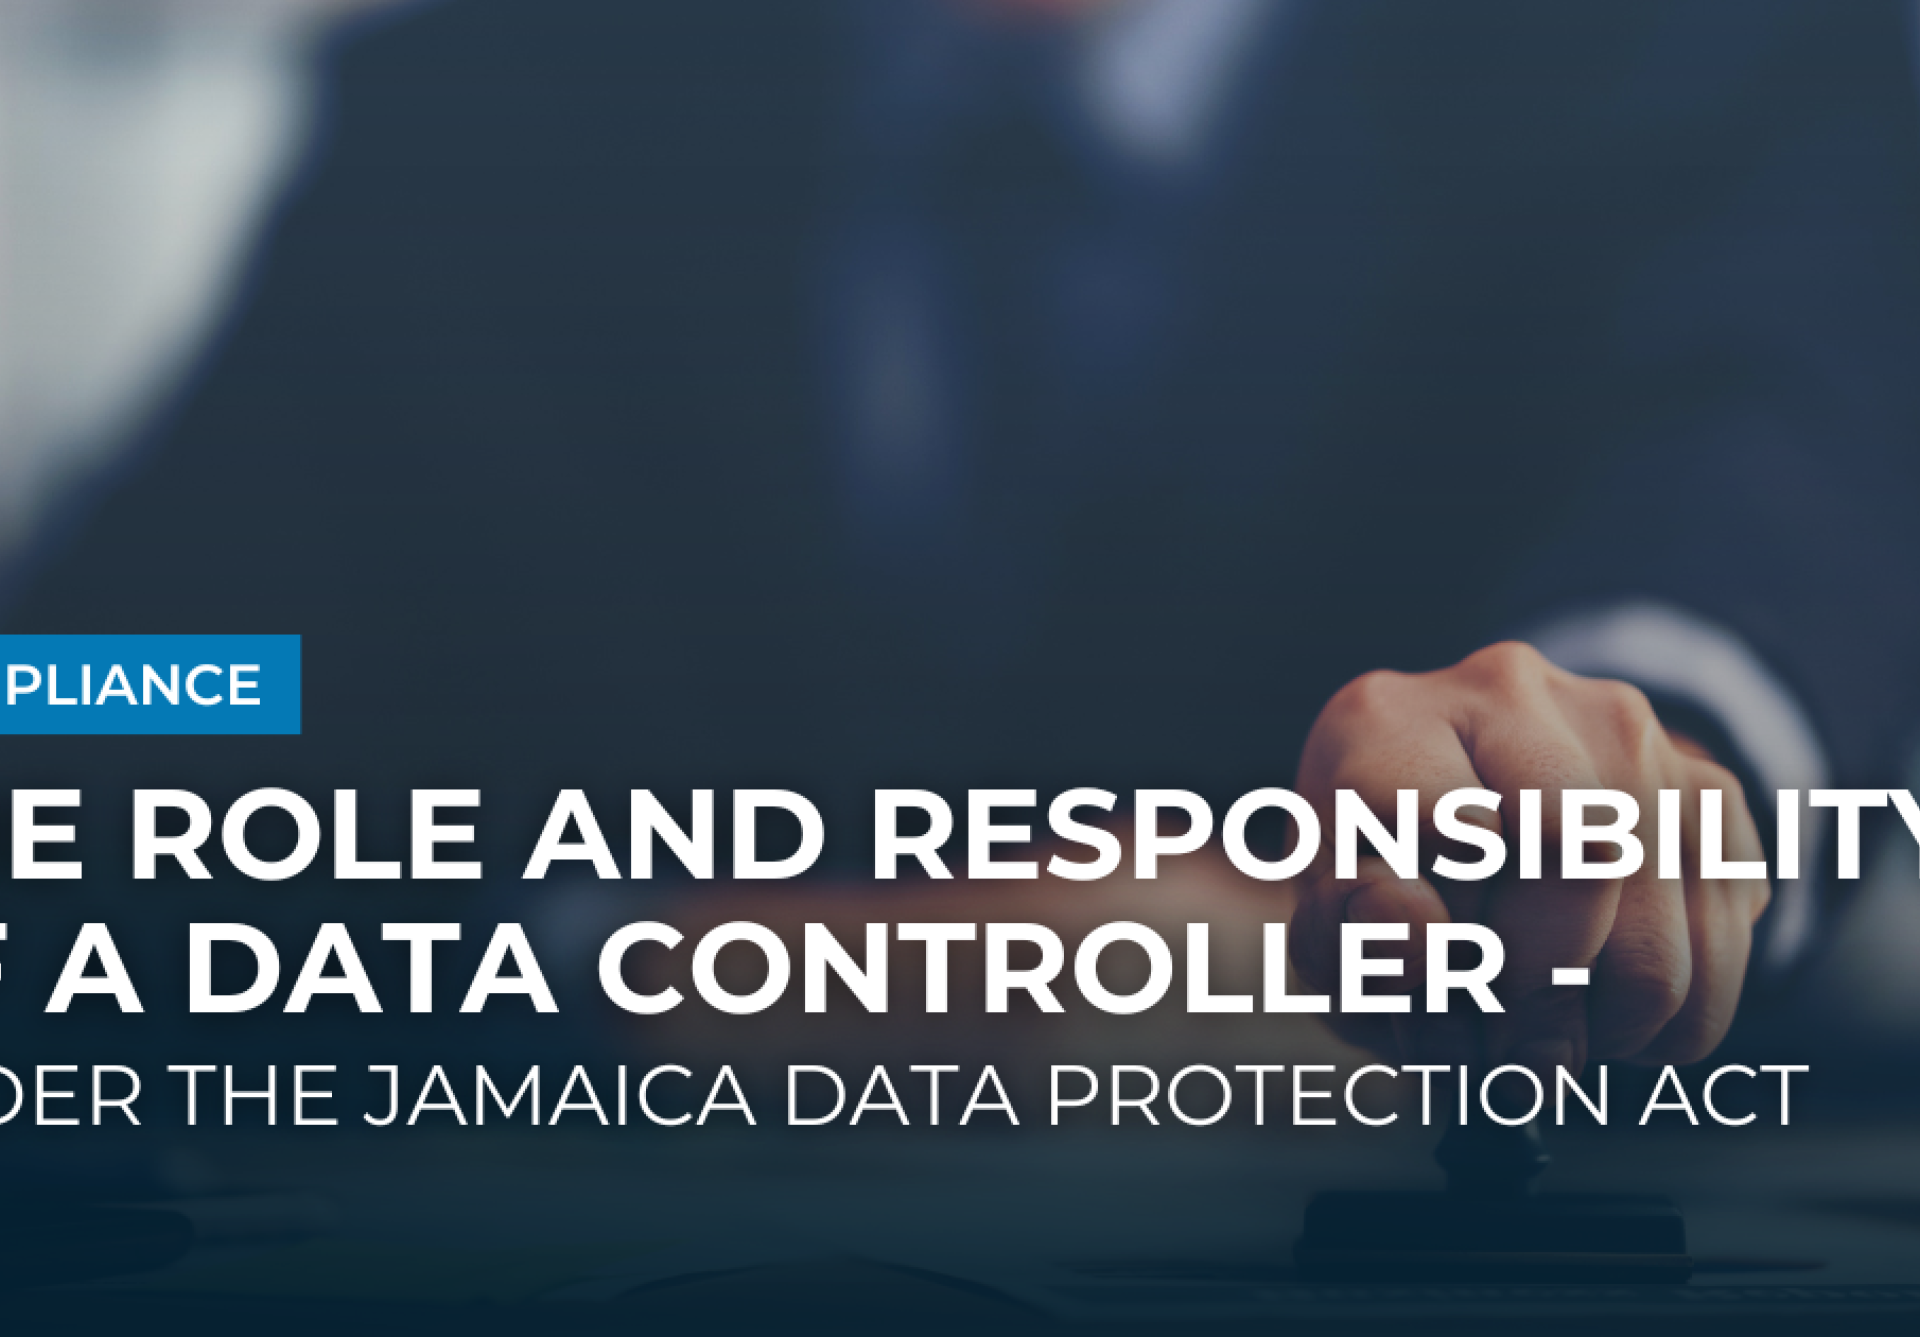 The Role and Responsibility of a Data Controller - Under the Jamaica Data Protection Act